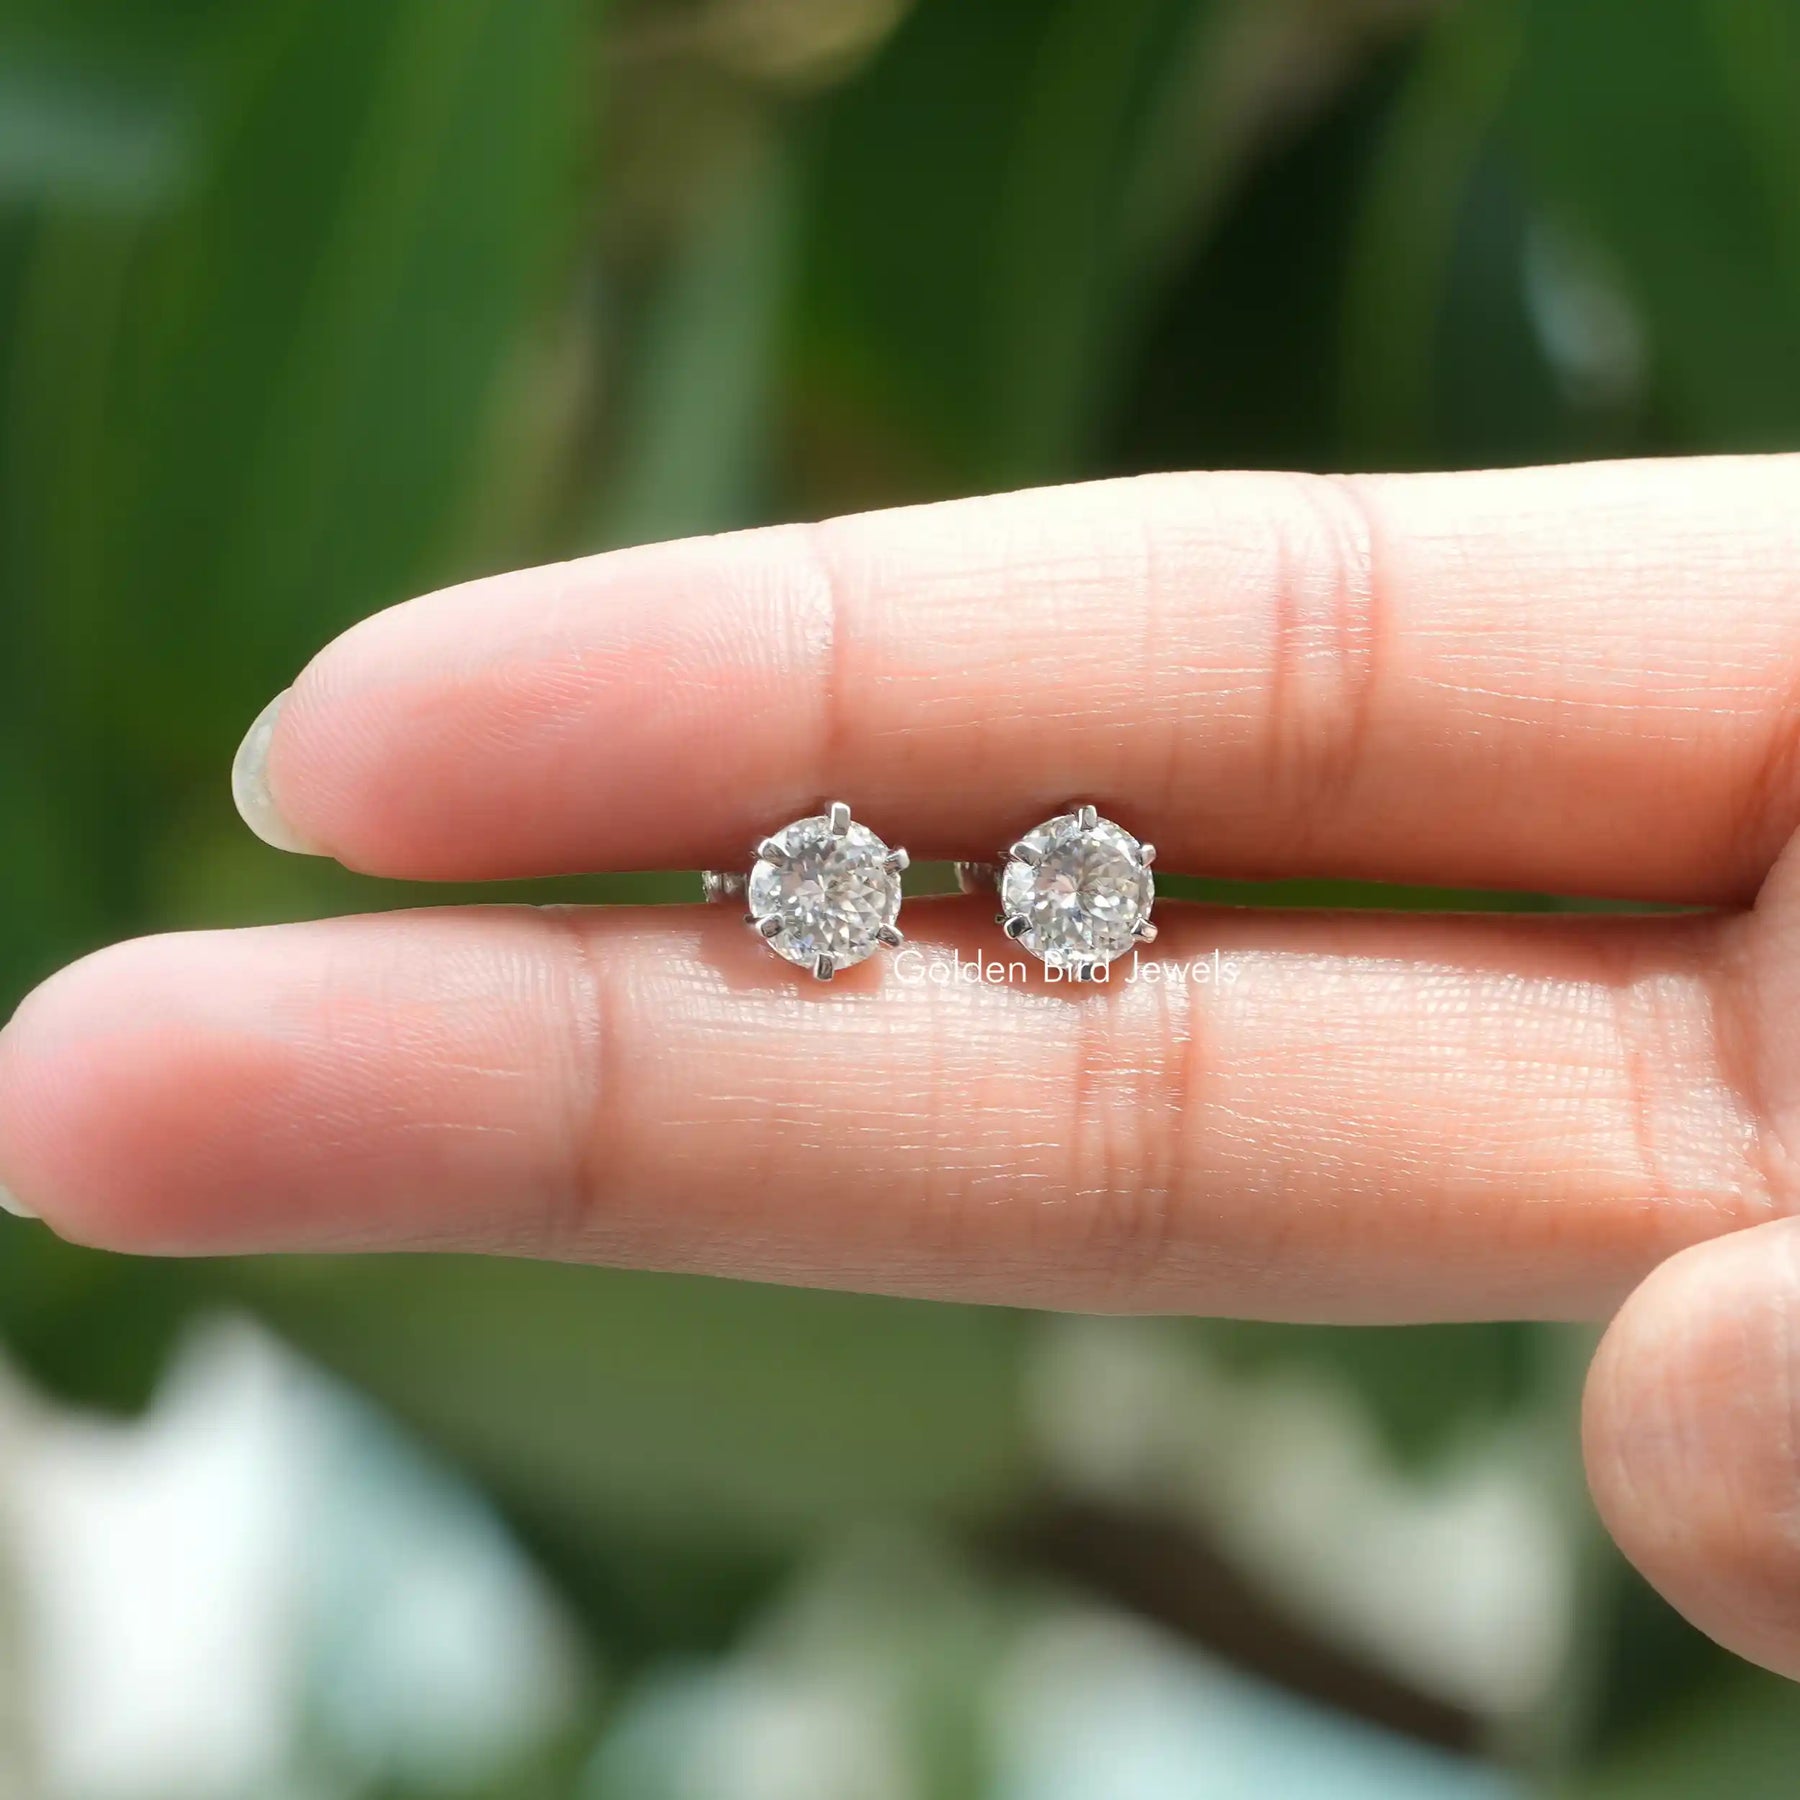 [Holding In Finger a Pair of 2.16 TCW Portuguese Moissanite Stud Earrings]-[Golden Bird Jewels]